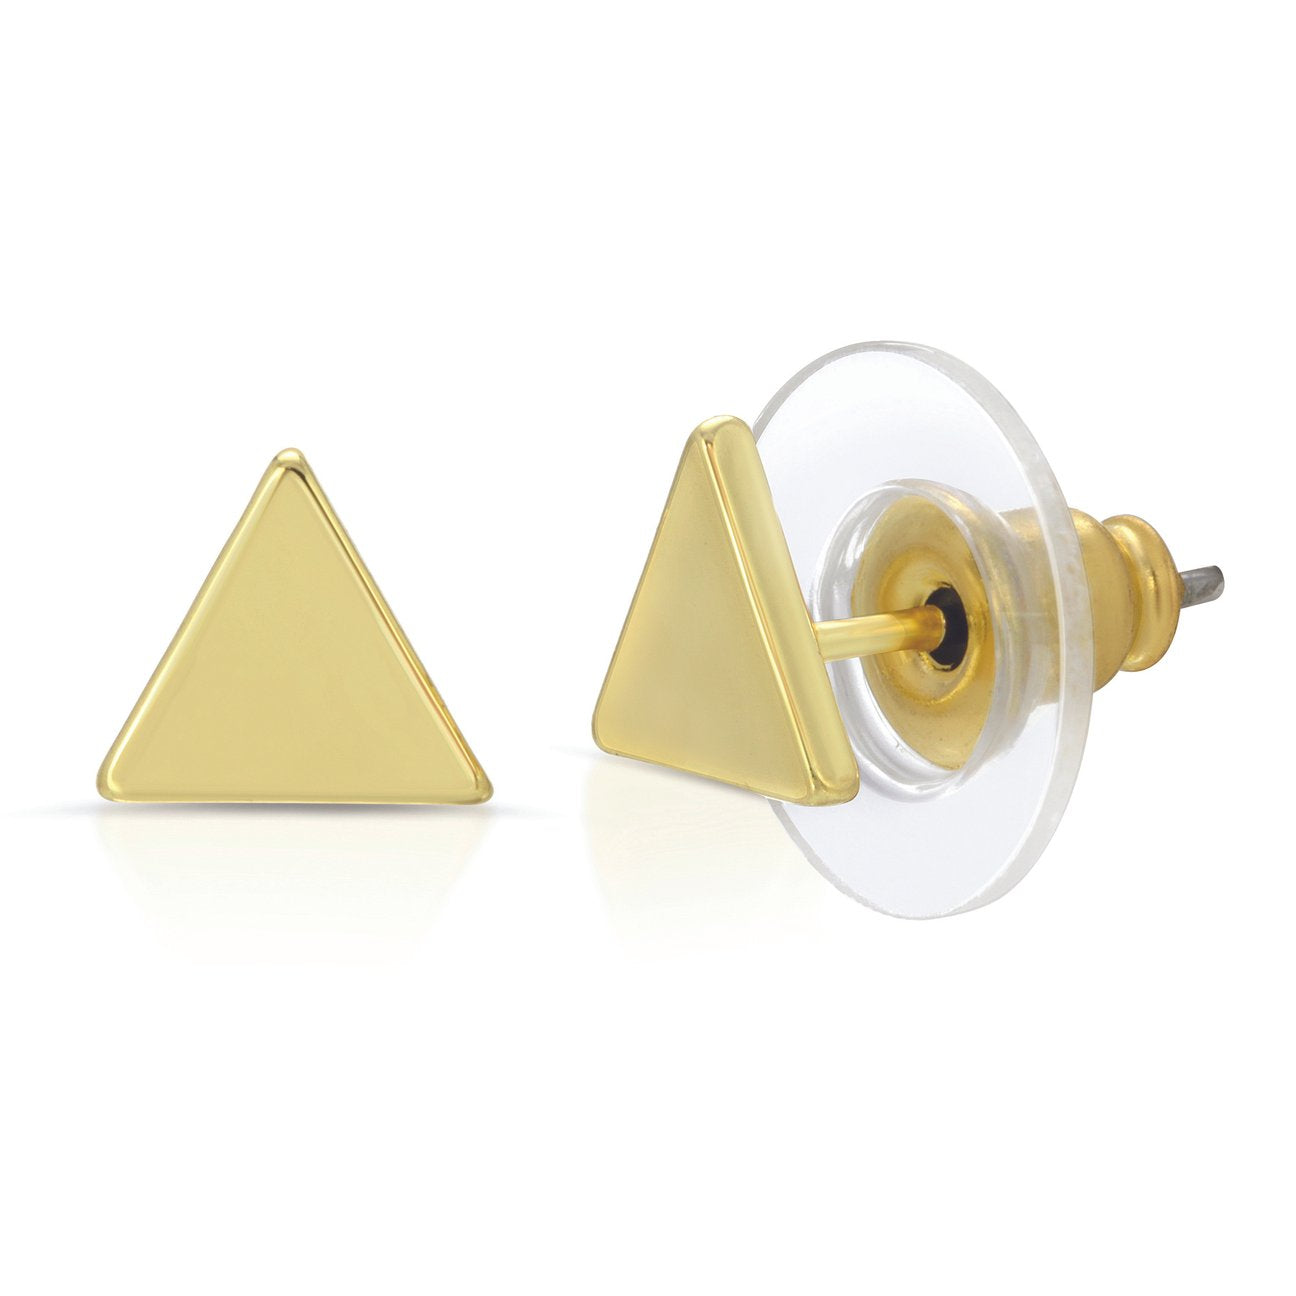 You Are Balanced Gold Triangle Earrings